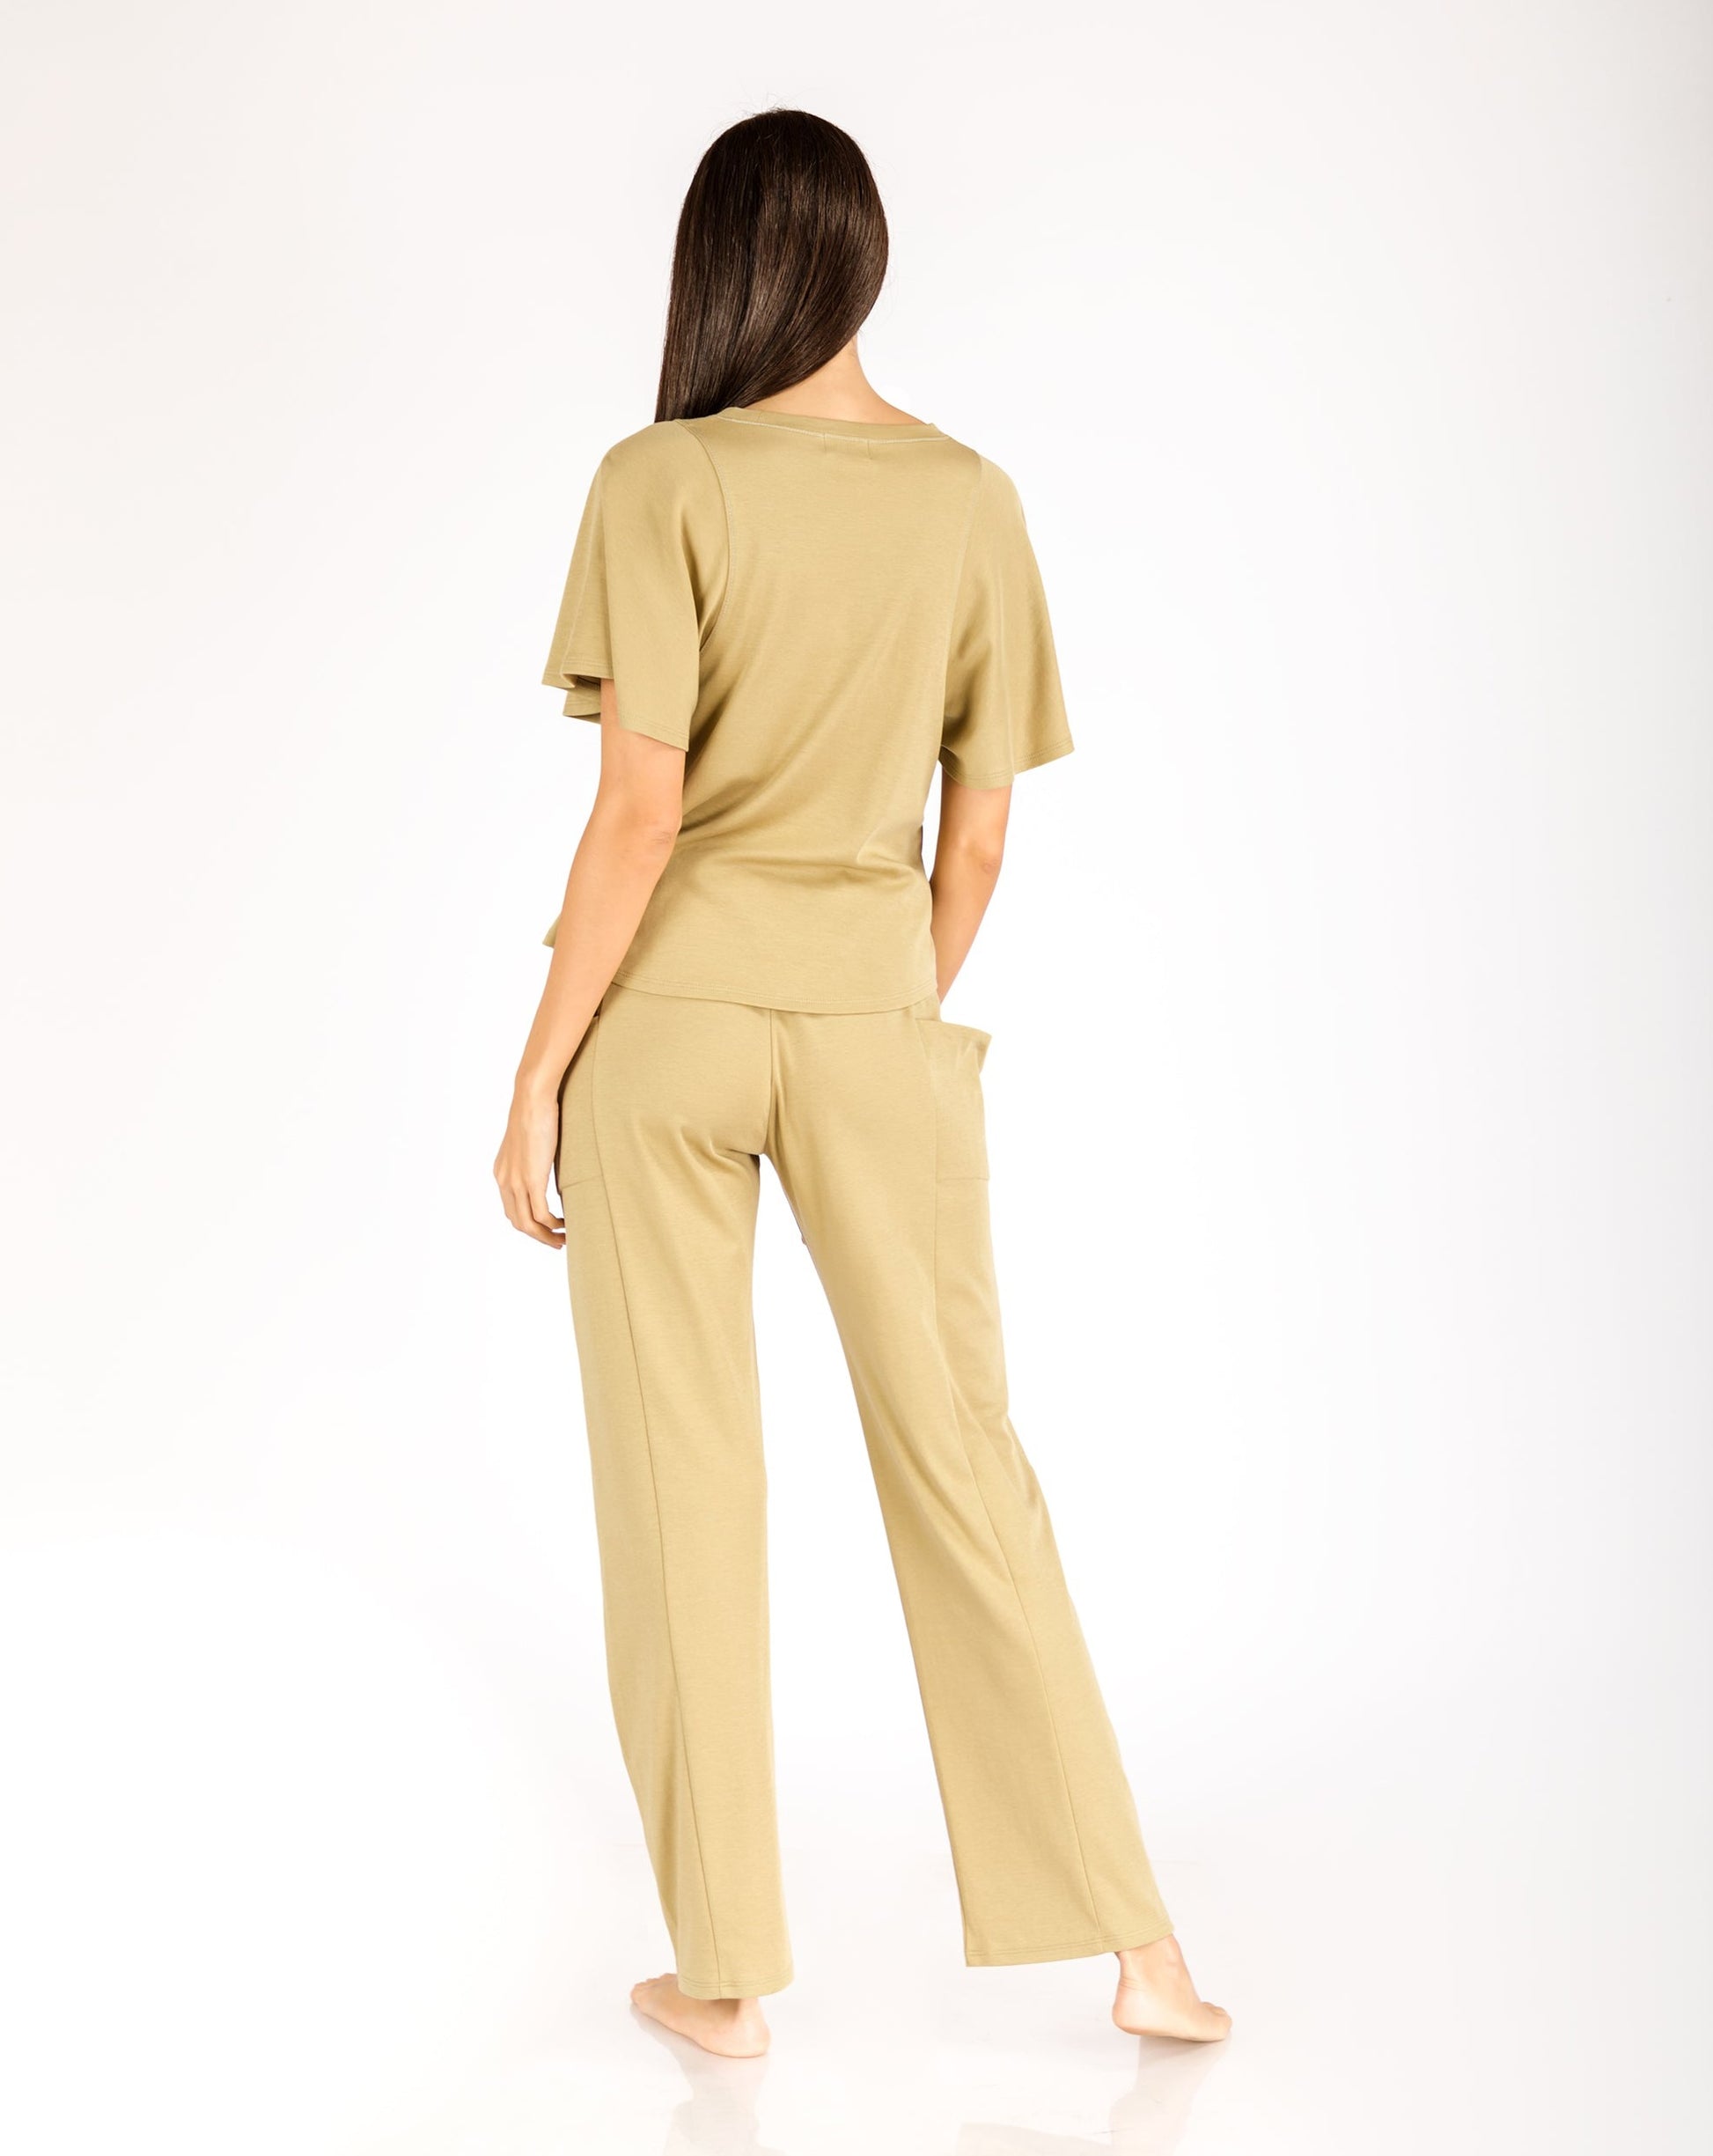 women_s-pajama-set-Straight-pant-with-pocket-detail-and-top-with-oversized-sleeves-olive-Lavender-Dreams-2